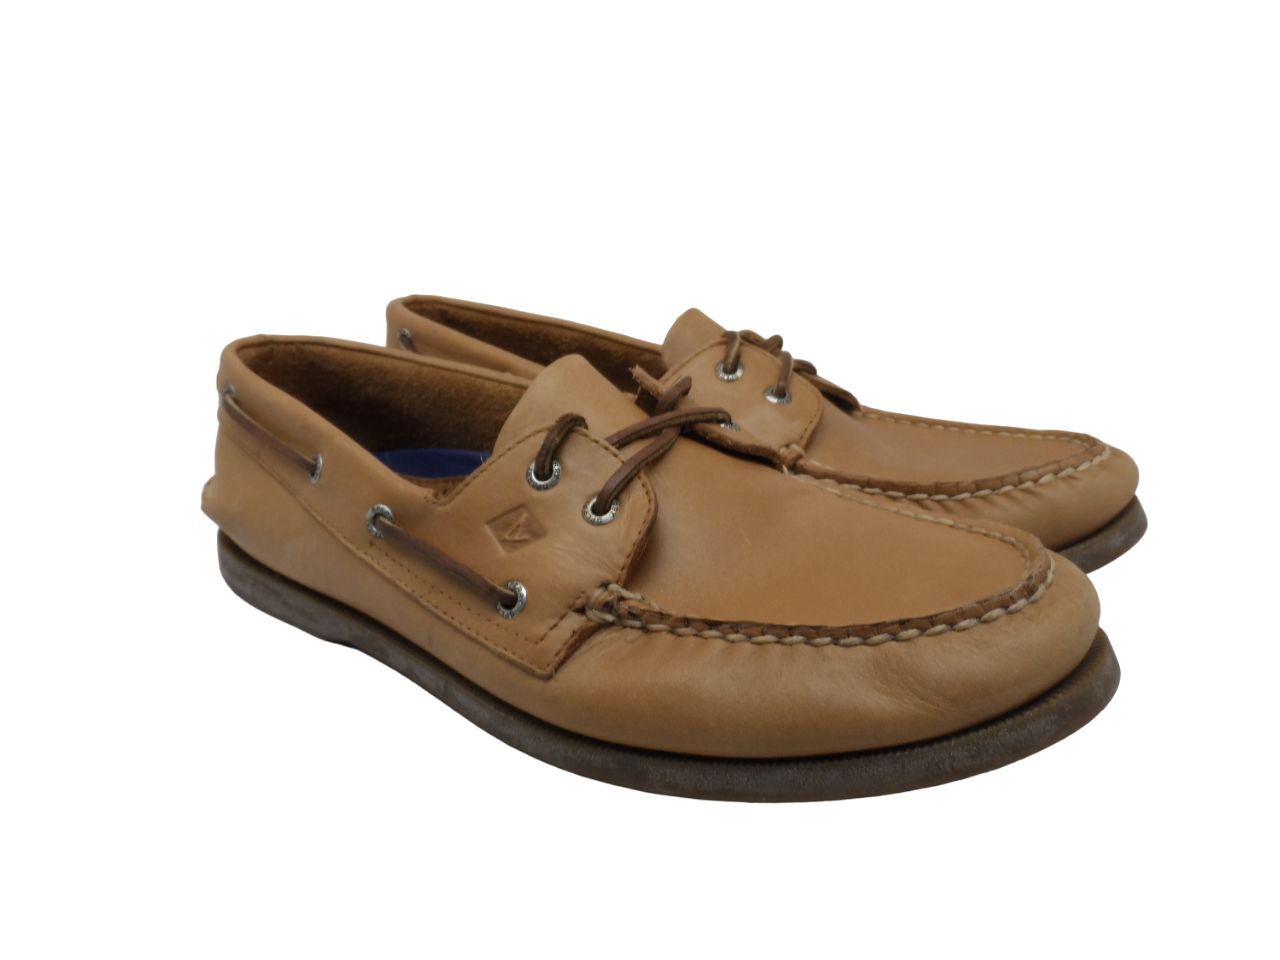 Primary image for Sperry Men's Authetic Original 2-Eye Boat Shoes 0197640 Tan Size 12M